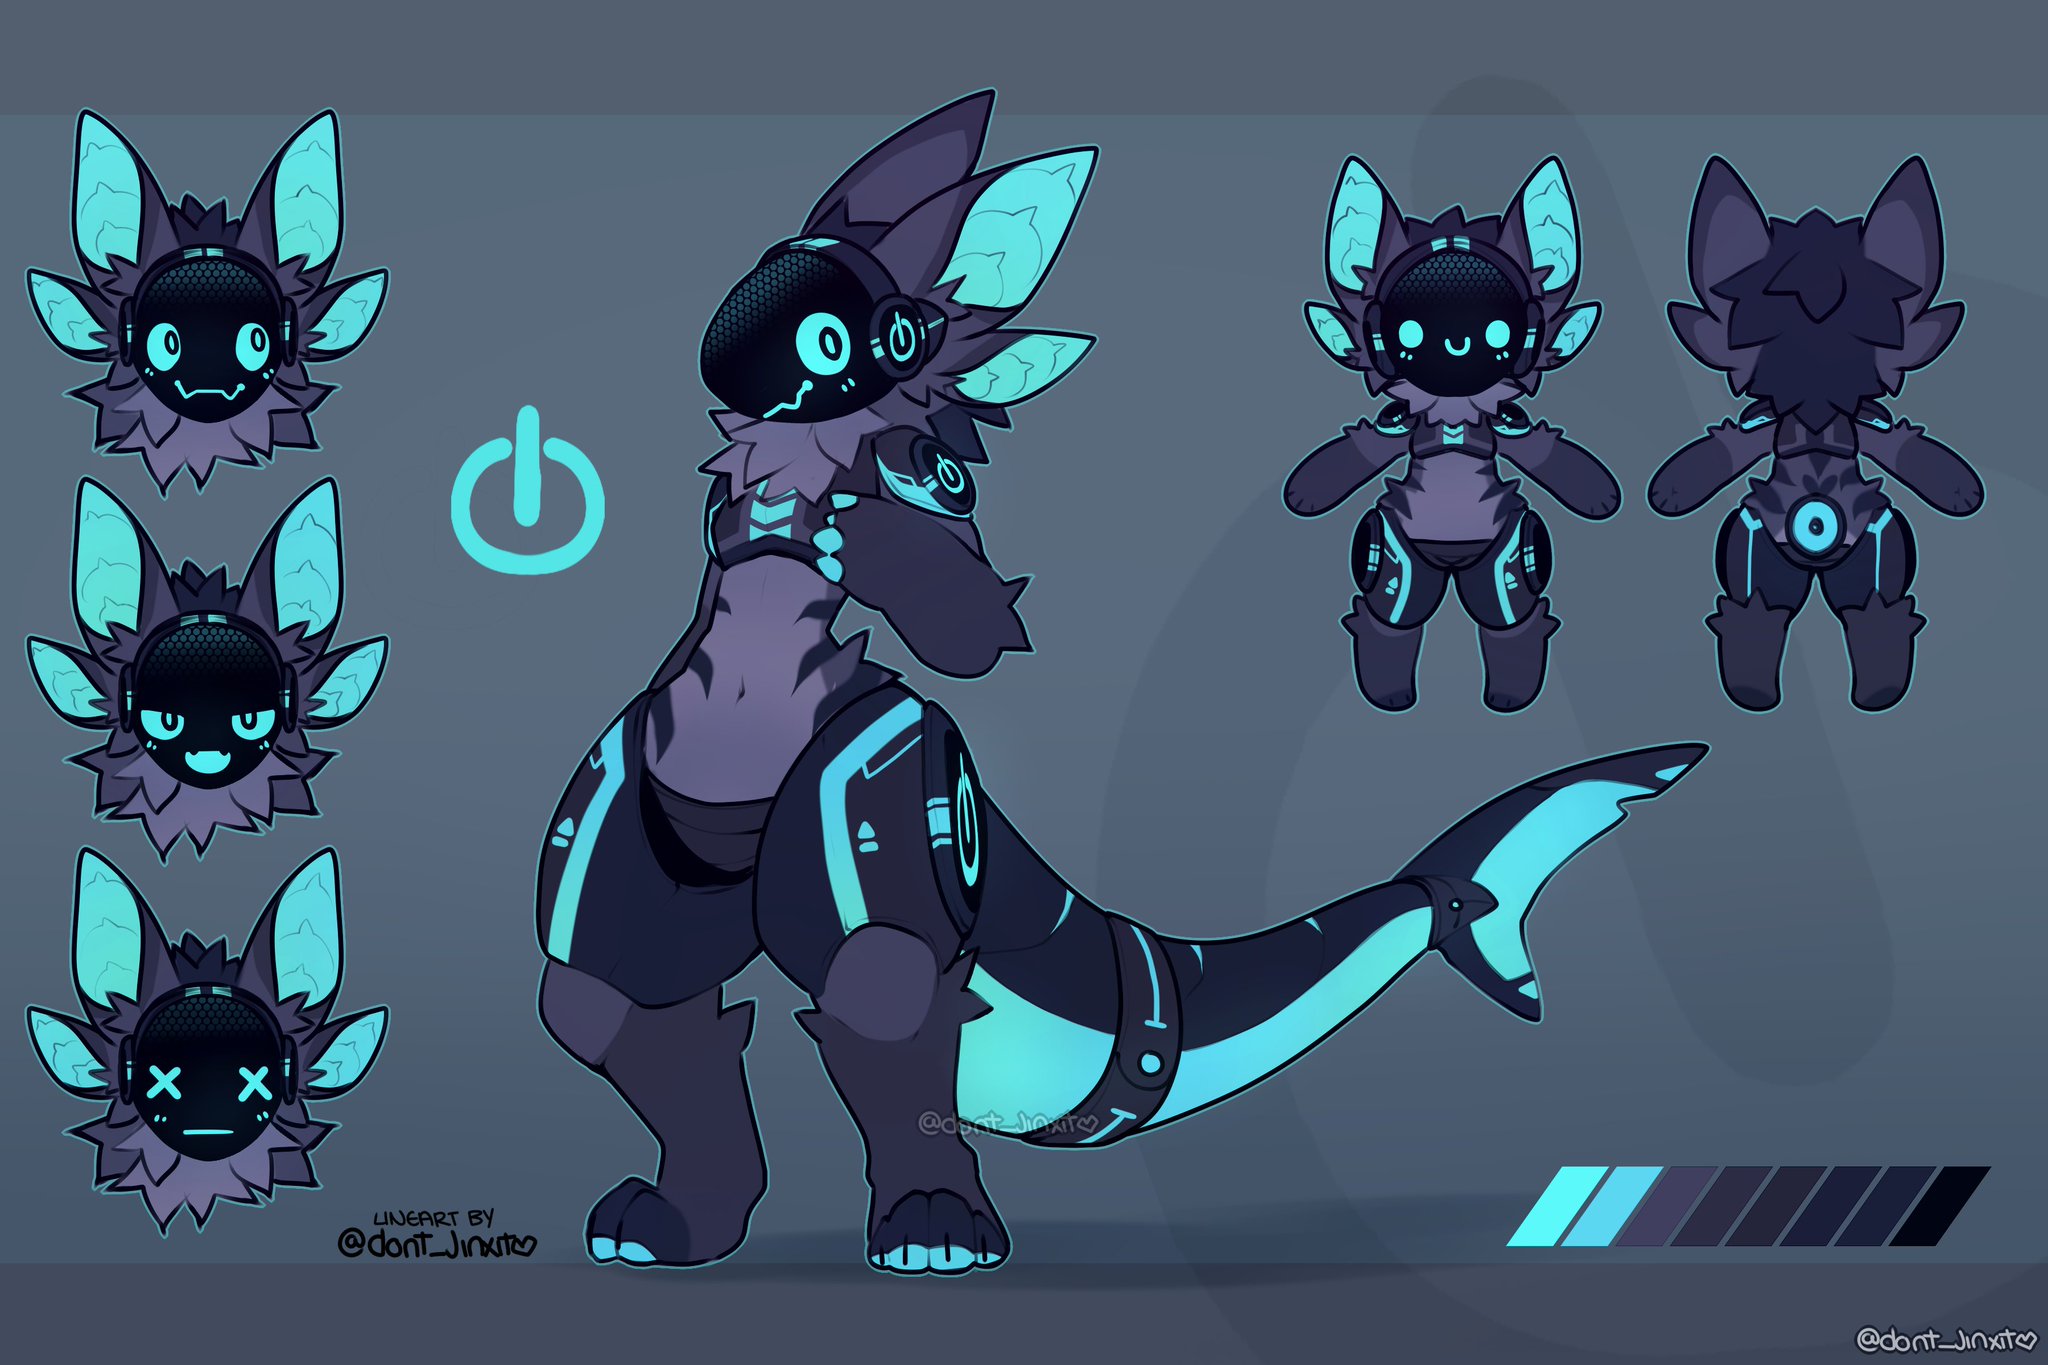 Dont Jinxit - Tib 💙 I've wanted a protogen for a while now